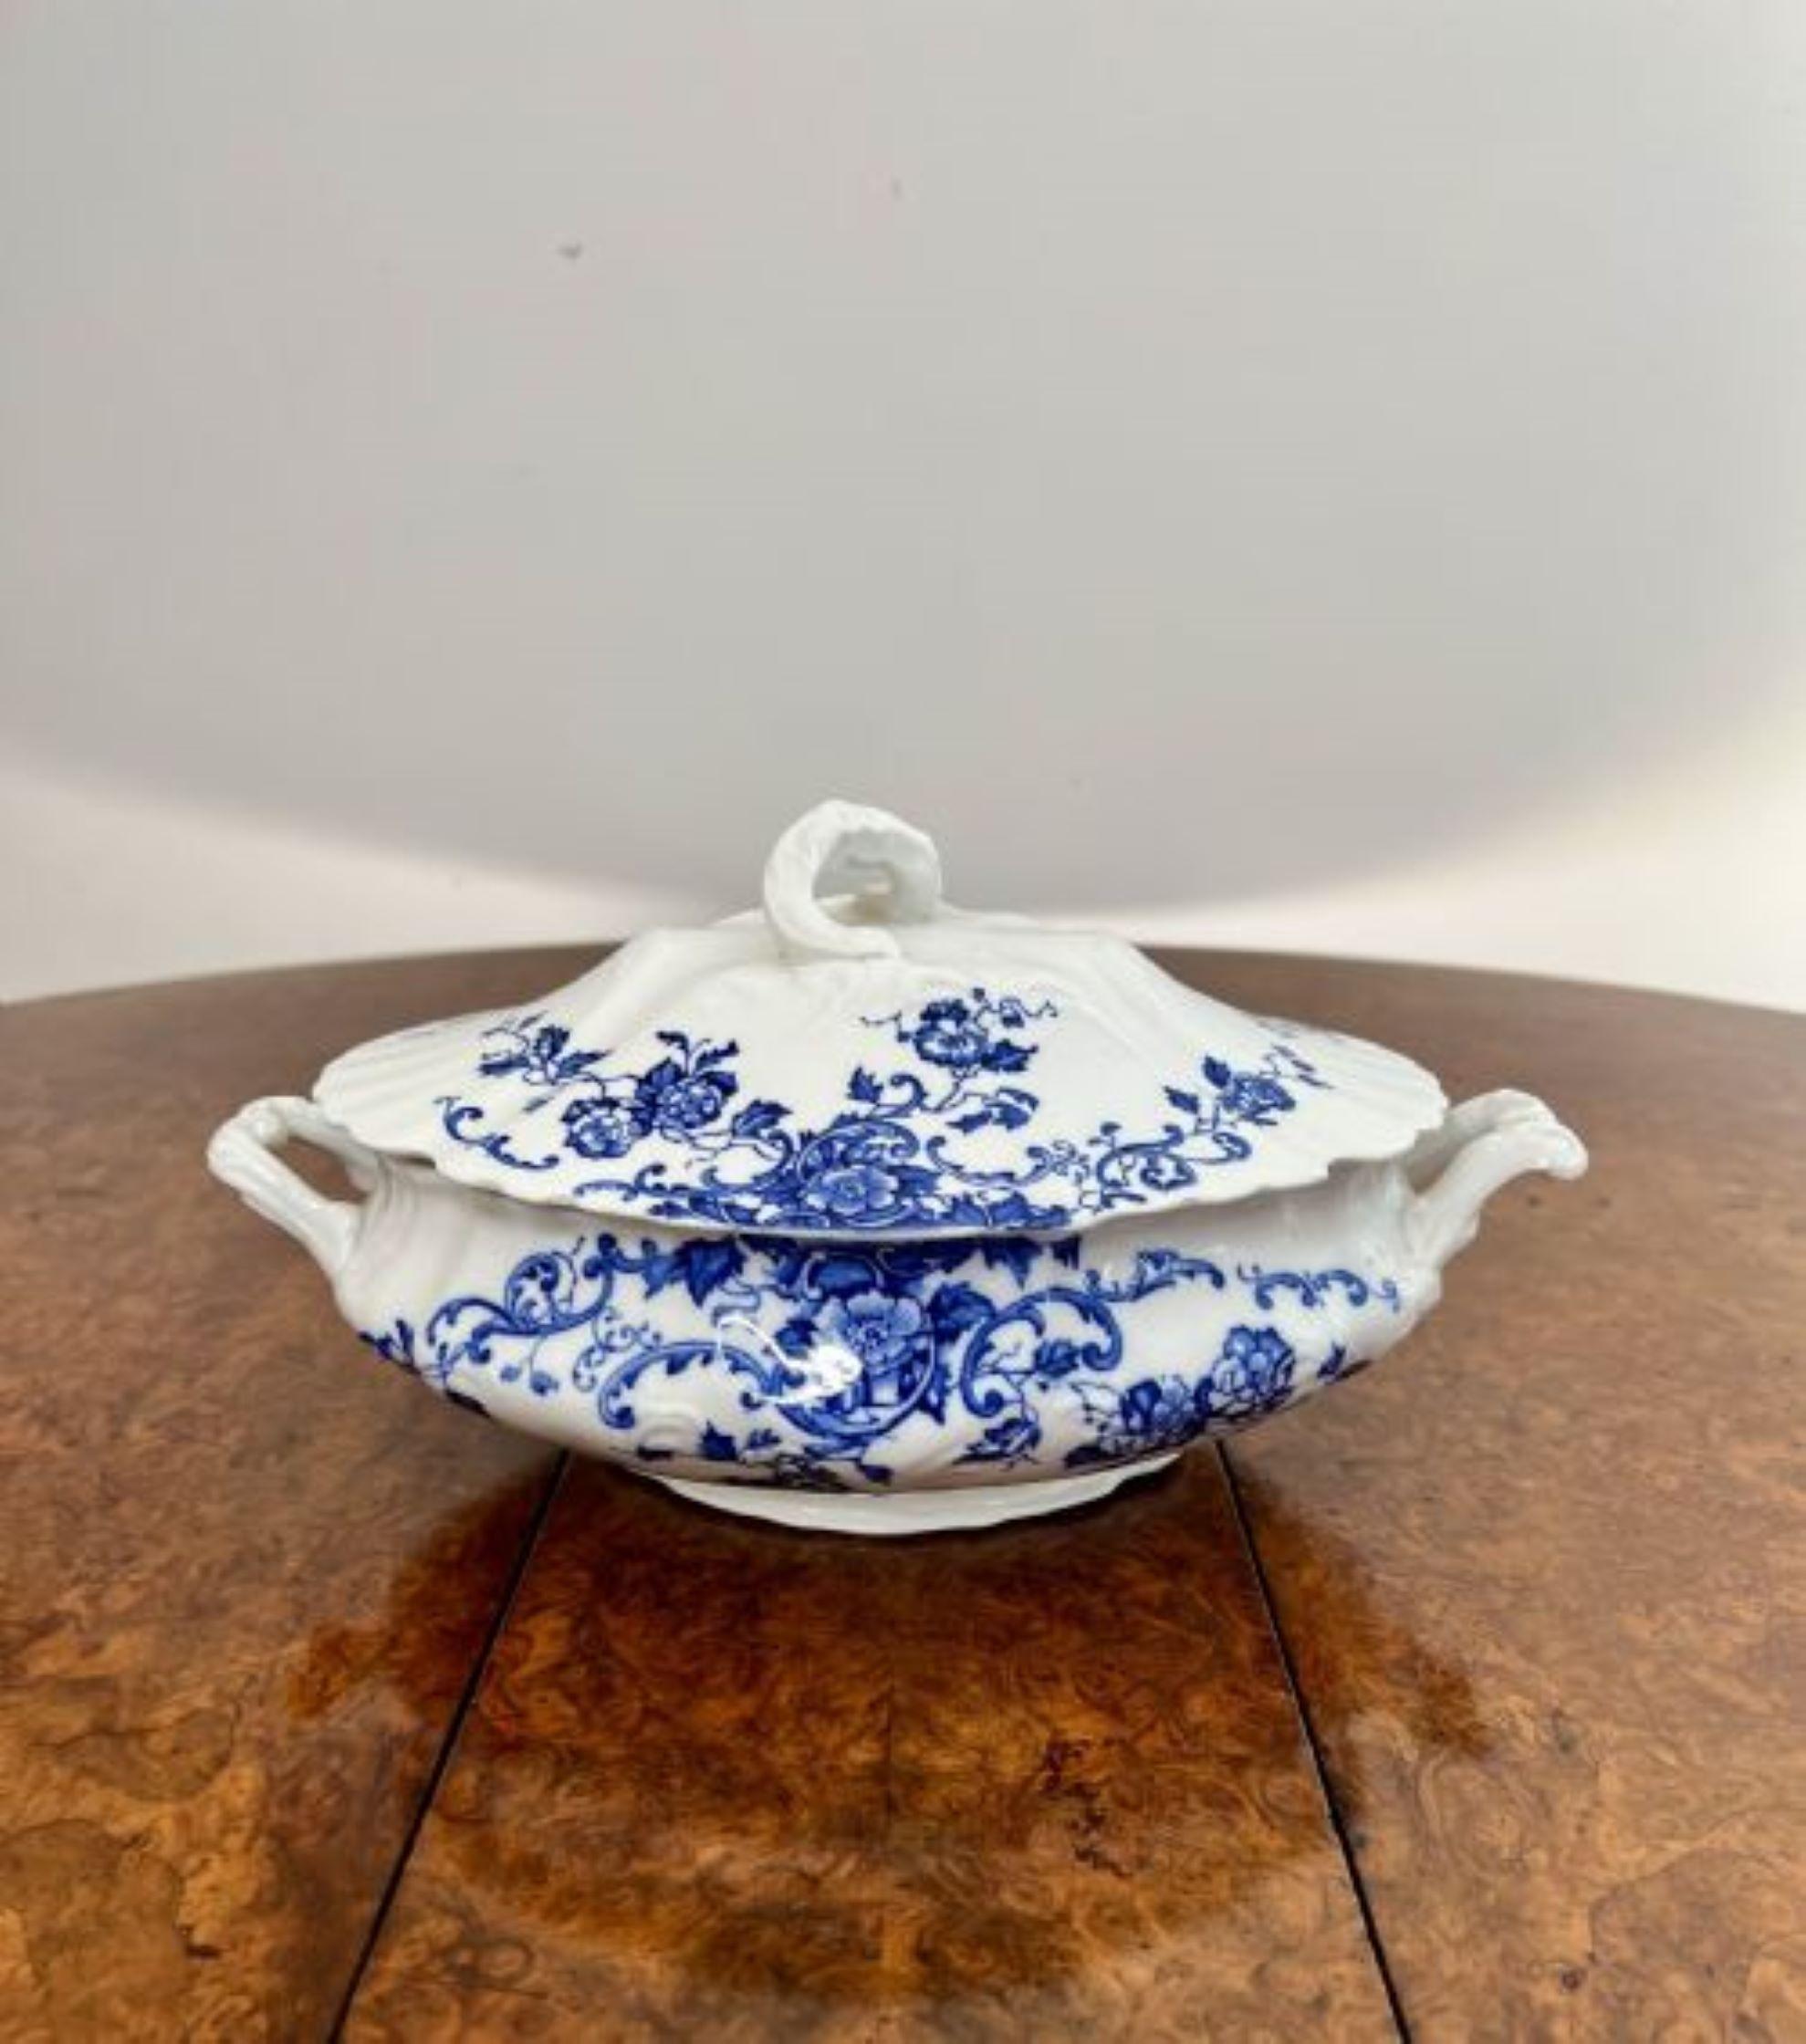 Quality collection of four antique Doulton Burslem Lorna tureens having a quality collection of four antique Dolton Burslem Lorna tureens comprising of three large tureens and one small tureen, fantastic decoration of flowers, leaves and vines in